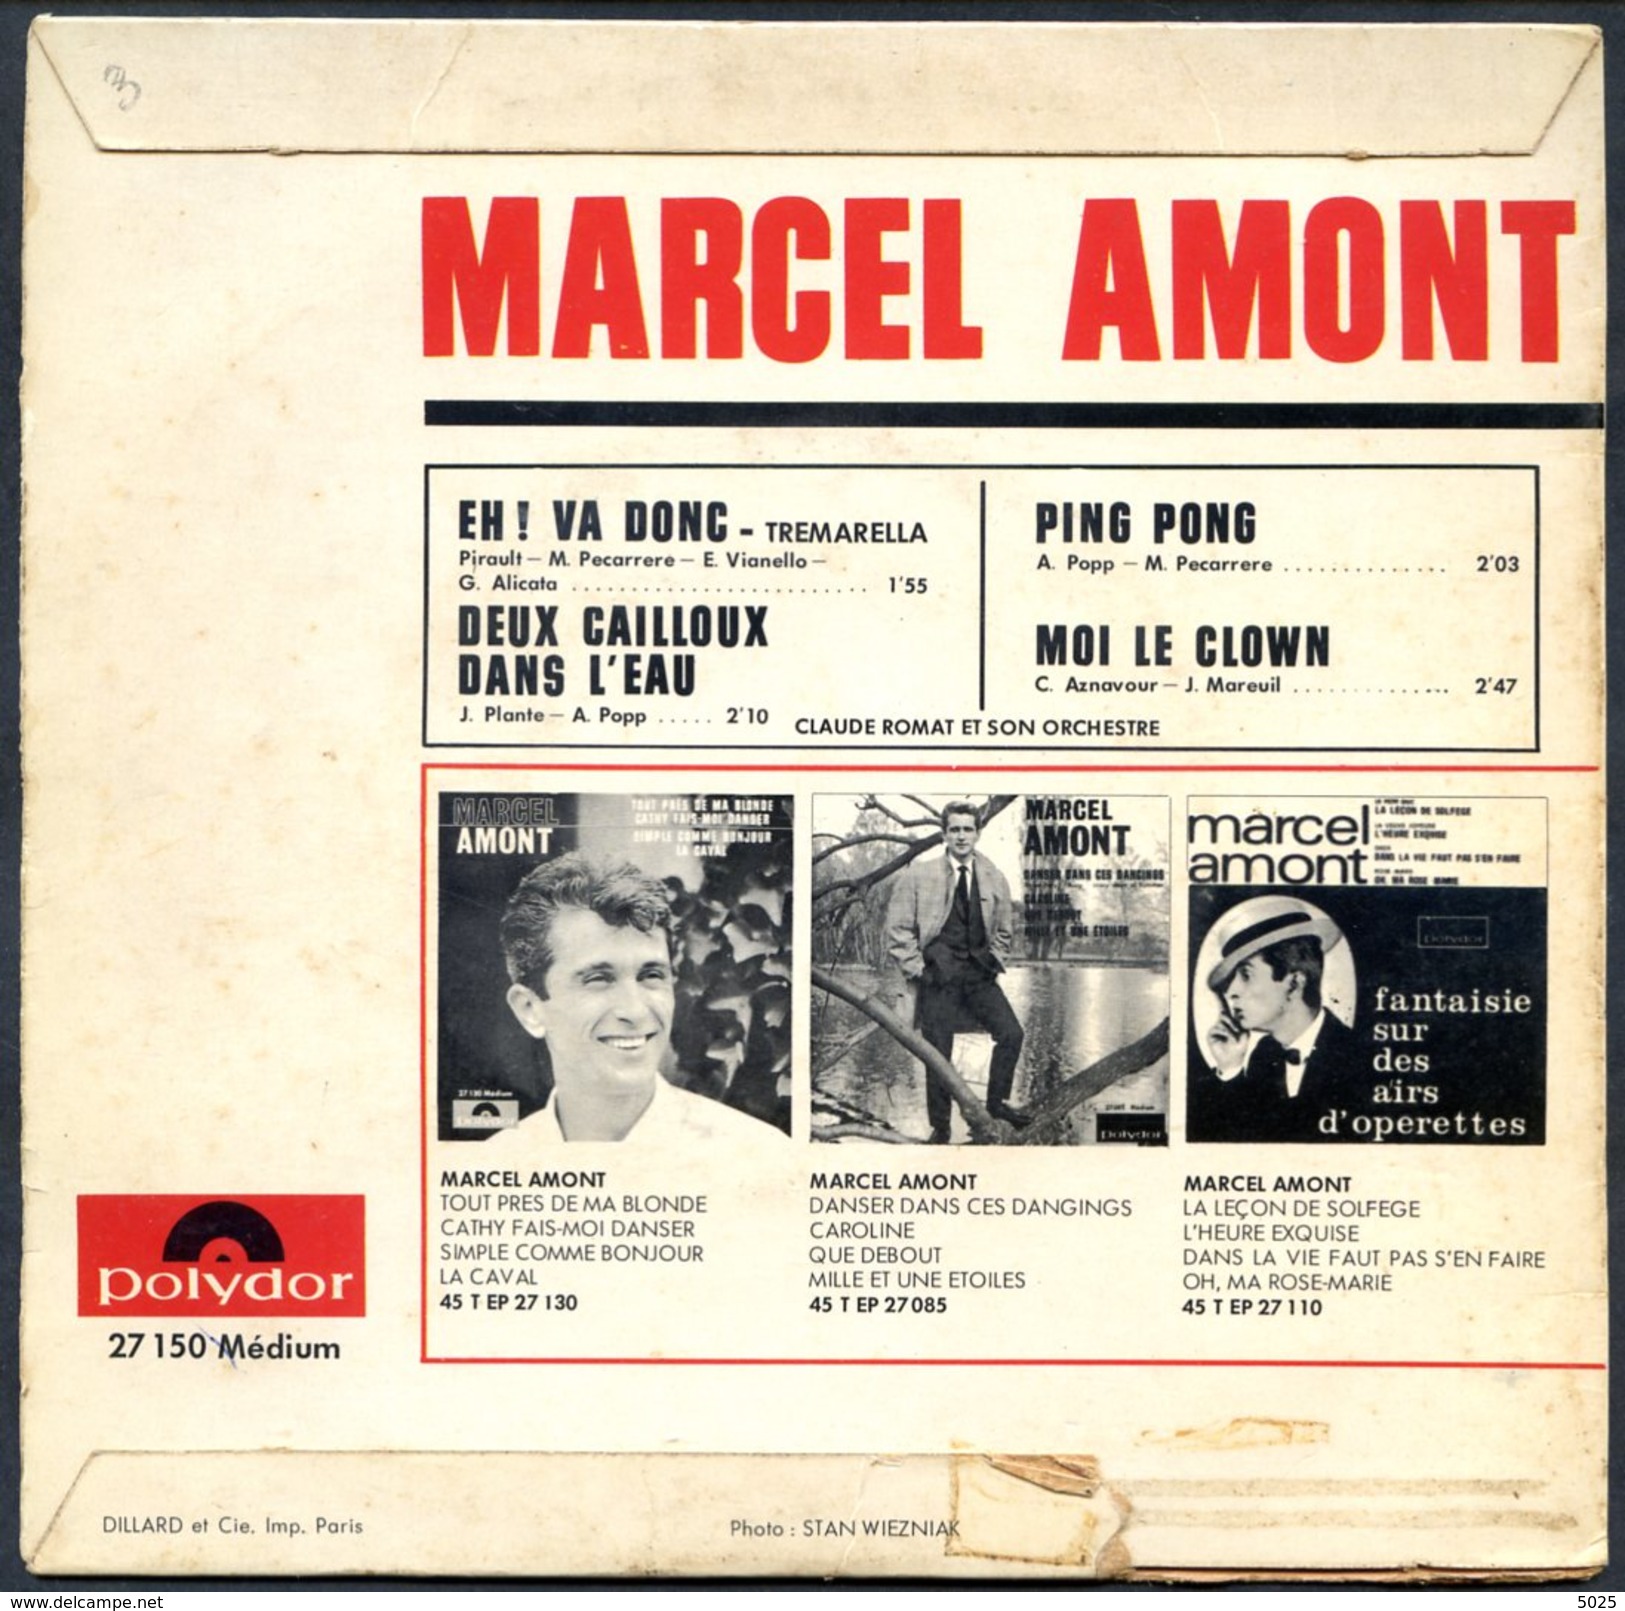 FRANCE 1964 - MARCEL AMONT - Ping-pong - Disque 45 Tours - Tischtennis Tavolo - Limited Editions